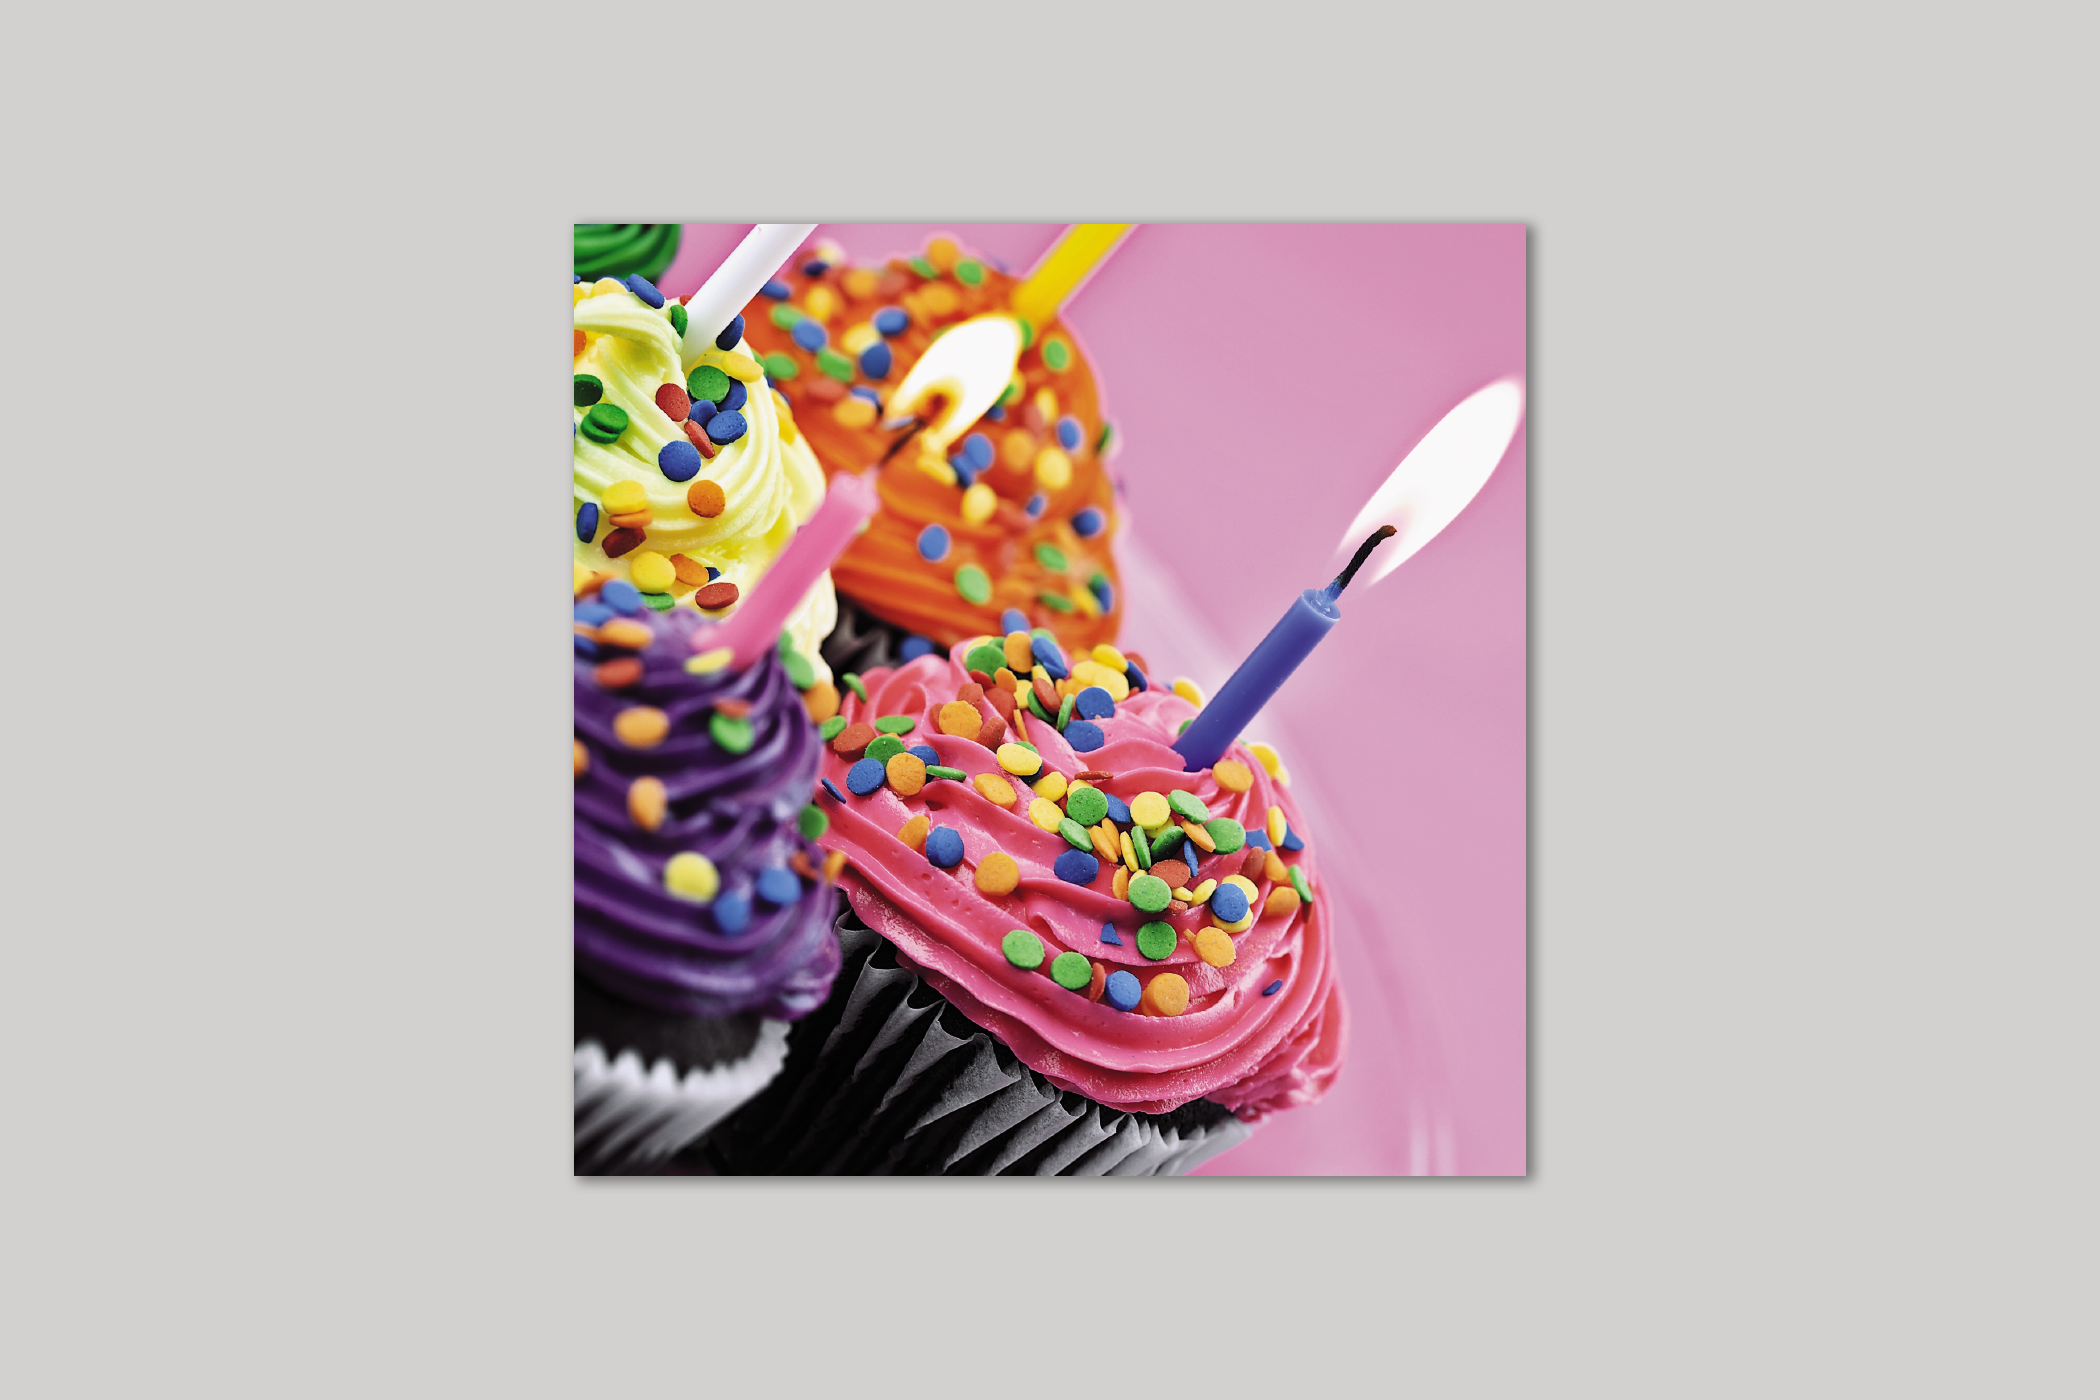 Birthday Cupcakes from Exposure range of photographic cards by Icon.